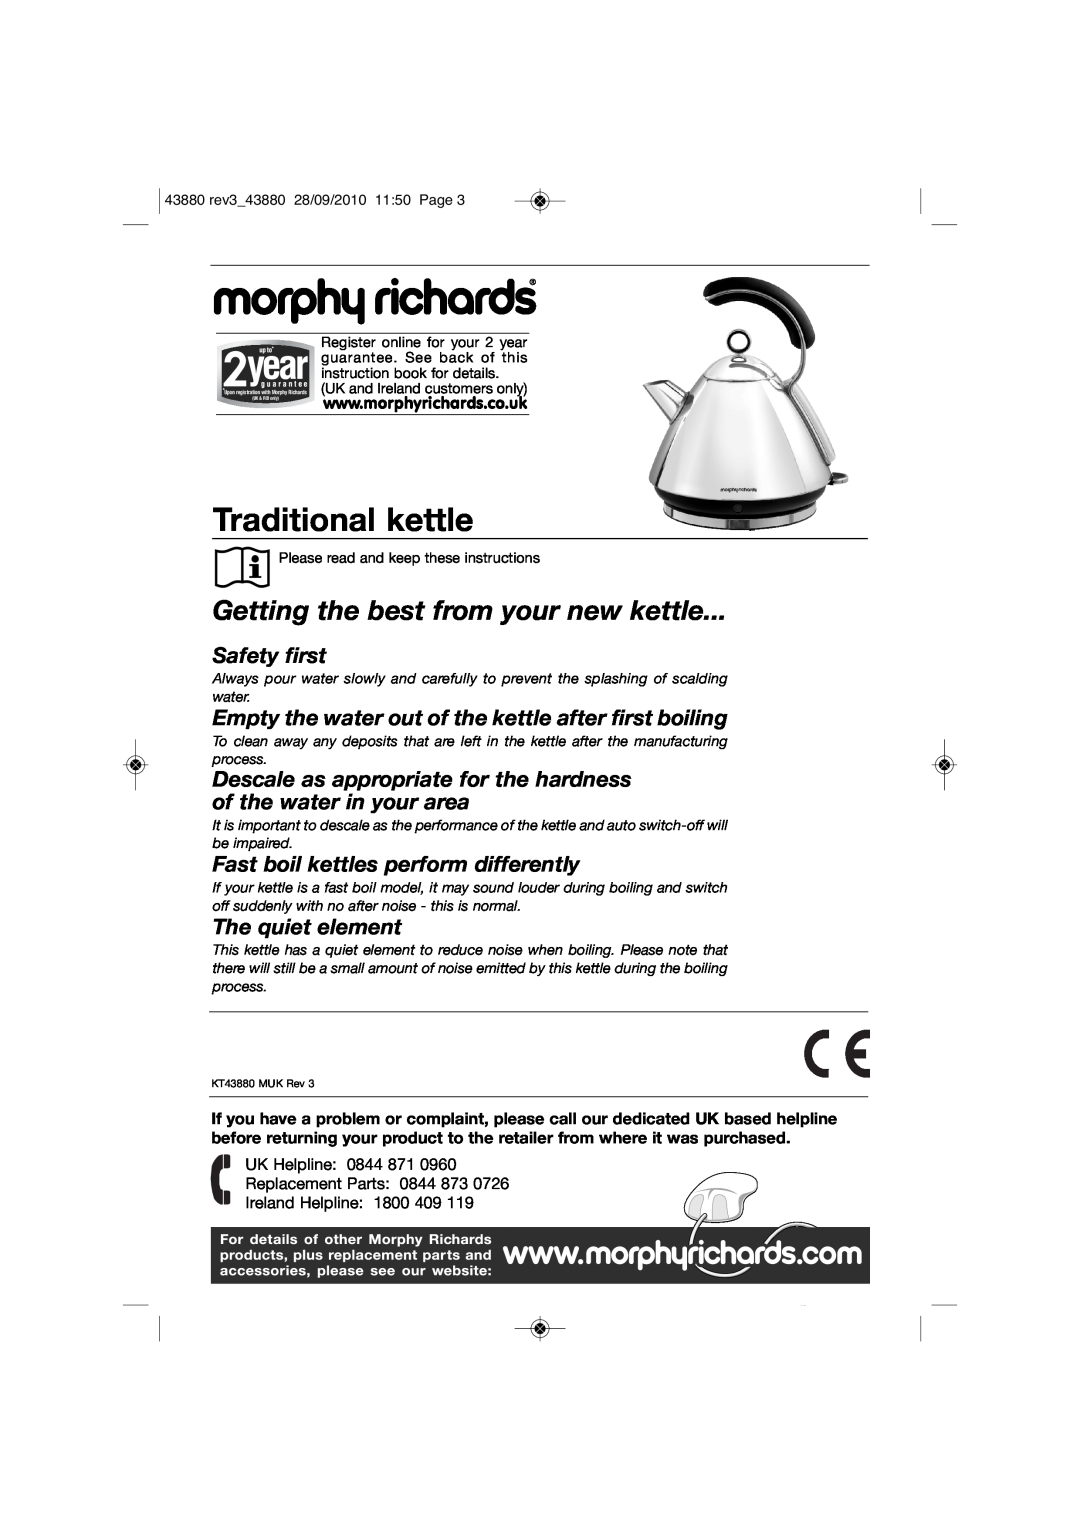 Morphy Richards 43037 warranty Traditional kettle, Getting the best from your new kettle, Safety first, The quiet element 